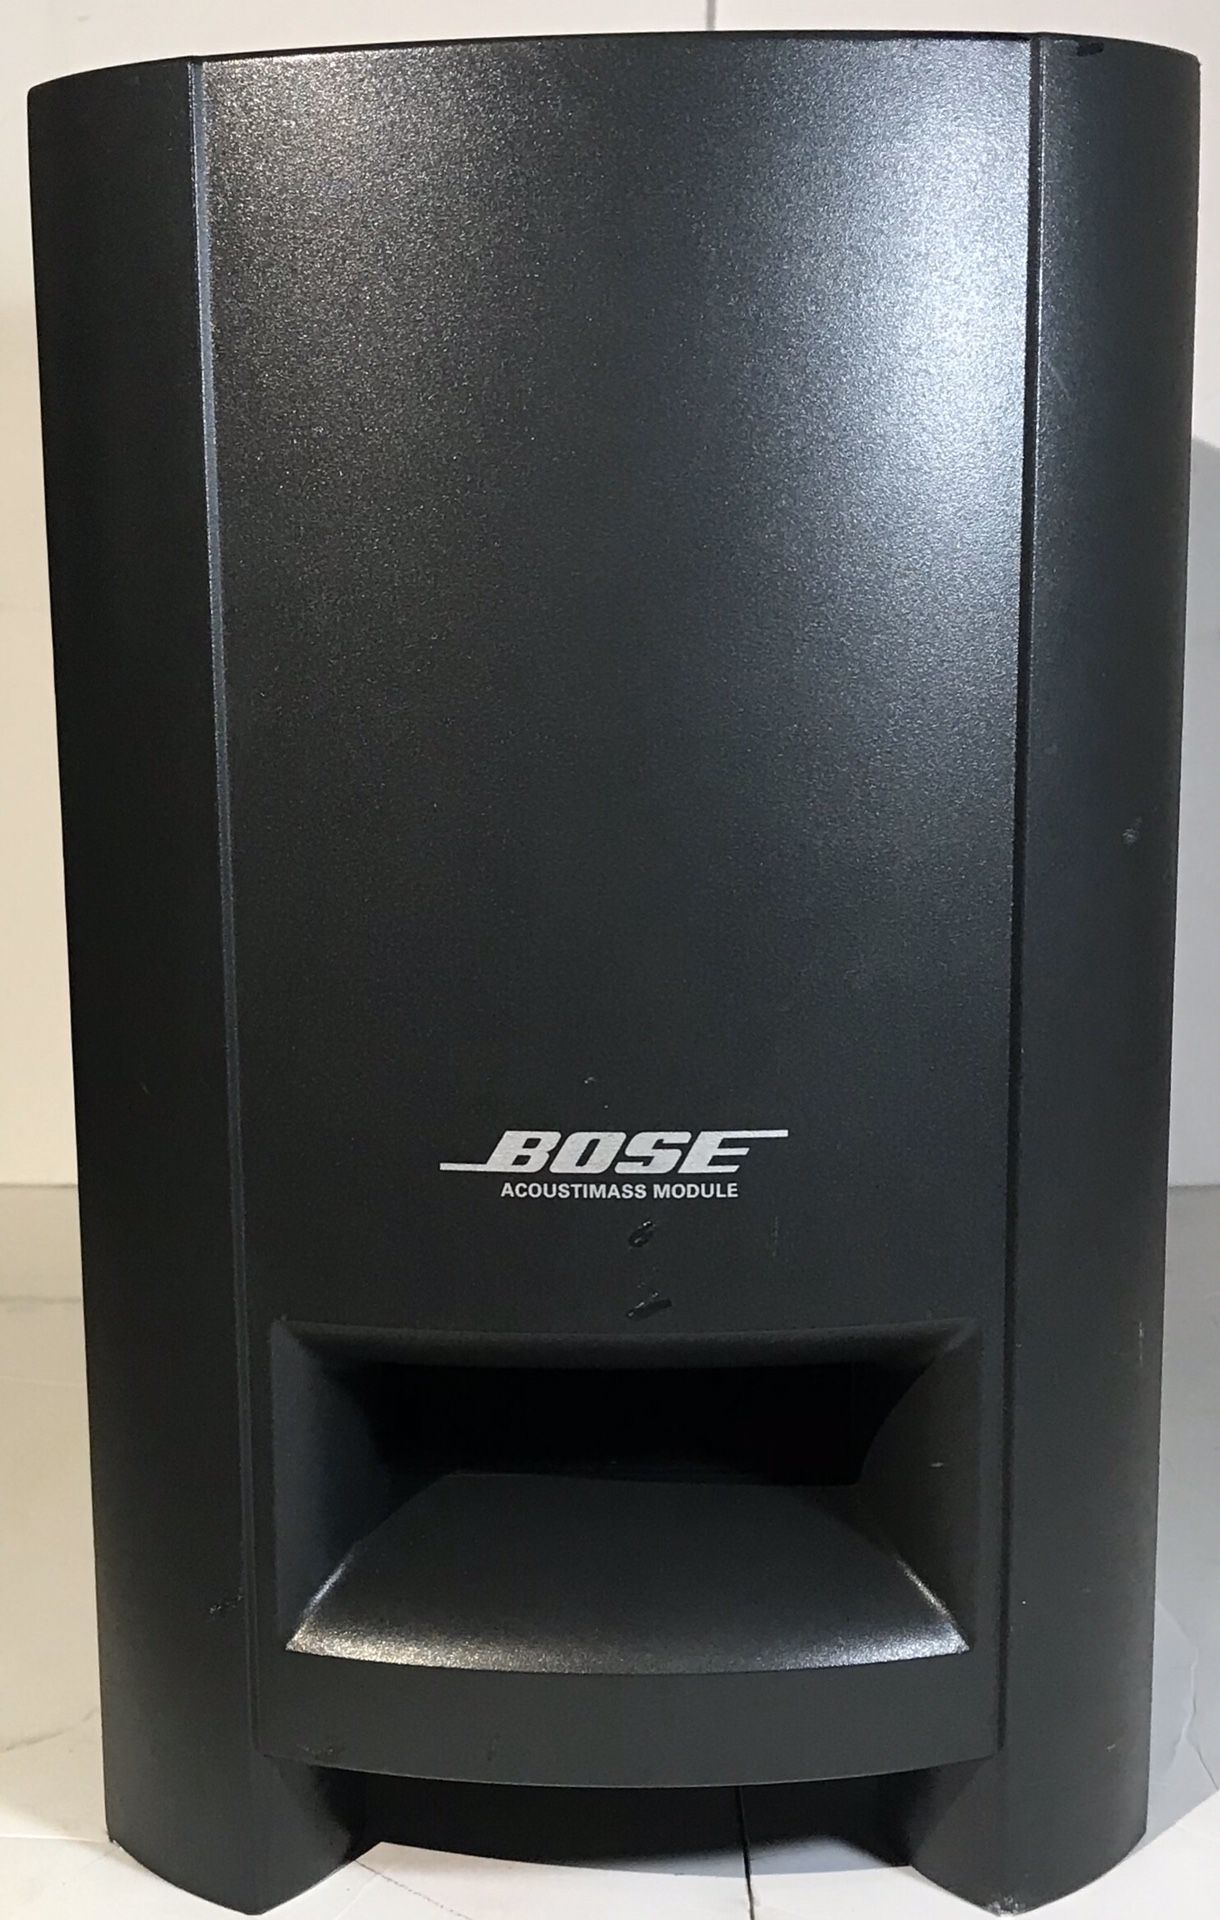 BOSE CineMate Series II Digital Home Theater System-ACOUSTIMASS-Subwoofer Only